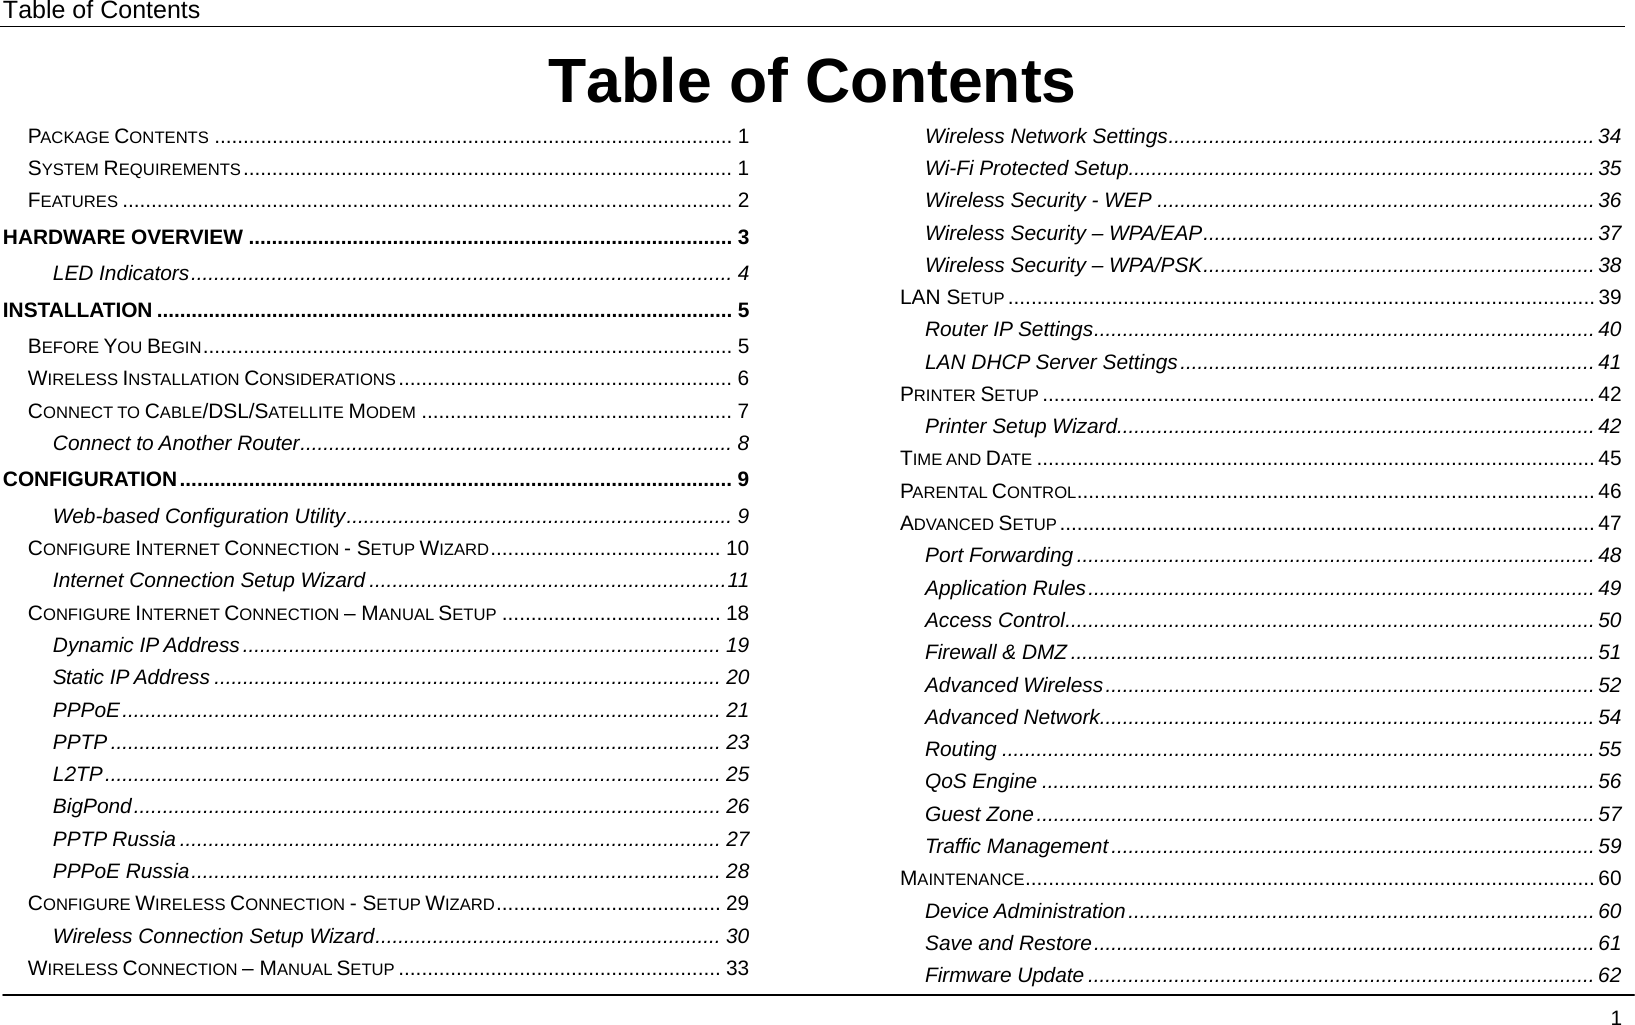 Table of Contents                                        1Table of ContentsPACKAGE CONTENTS .......................................................................................... 1 SYSTEM REQUIREMENTS..................................................................................... 1 FEATURES .......................................................................................................... 2 HARDWARE OVERVIEW .................................................................................... 3 LED Indicators.............................................................................................. 4 INSTALLATION .................................................................................................... 5 BEFORE YOU BEGIN............................................................................................ 5 WIRELESS INSTALLATION CONSIDERATIONS .......................................................... 6 CONNECT TO CABLE/DSL/SATELLITE MODEM ...................................................... 7 Connect to Another Router........................................................................... 8 CONFIGURATION................................................................................................ 9 Web-based Configuration Utility................................................................... 9 CONFIGURE INTERNET CONNECTION - SETUP WIZARD........................................ 10 Internet Connection Setup Wizard ..............................................................11 CONFIGURE INTERNET CONNECTION – MANUAL SETUP ...................................... 18 Dynamic IP Address................................................................................... 19 Static IP Address ........................................................................................ 20 PPPoE........................................................................................................ 21 PPTP .......................................................................................................... 23 L2TP........................................................................................................... 25 BigPond...................................................................................................... 26 PPTP Russia .............................................................................................. 27 PPPoE Russia............................................................................................ 28 CONFIGURE WIRELESS CONNECTION - SETUP WIZARD....................................... 29 Wireless Connection Setup Wizard............................................................ 30 WIRELESS CONNECTION – MANUAL SETUP ........................................................ 33 Wireless Network Settings.......................................................................... 34 Wi-Fi Protected Setup................................................................................. 35 Wireless Security - WEP ............................................................................ 36 Wireless Security – WPA/EAP.................................................................... 37 Wireless Security – WPA/PSK.................................................................... 38 LAN SETUP ...................................................................................................... 39 Router IP Settings....................................................................................... 40 LAN DHCP Server Settings........................................................................ 41 PRINTER SETUP ................................................................................................ 42 Printer Setup Wizard................................................................................... 42 TIME AND DATE ................................................................................................. 45 PARENTAL CONTROL.......................................................................................... 46 ADVANCED SETUP............................................................................................. 47 Port Forwarding .......................................................................................... 48 Application Rules........................................................................................ 49 Access Control............................................................................................ 50 Firewall &amp; DMZ ........................................................................................... 51 Advanced Wireless..................................................................................... 52 Advanced Network...................................................................................... 54 Routing ....................................................................................................... 55 QoS Engine ................................................................................................ 56 Guest Zone................................................................................................. 57 Traffic Management.................................................................................... 59 MAINTENANCE................................................................................................... 60 Device Administration ................................................................................. 60 Save and Restore....................................................................................... 61 Firmware Update ........................................................................................ 62 